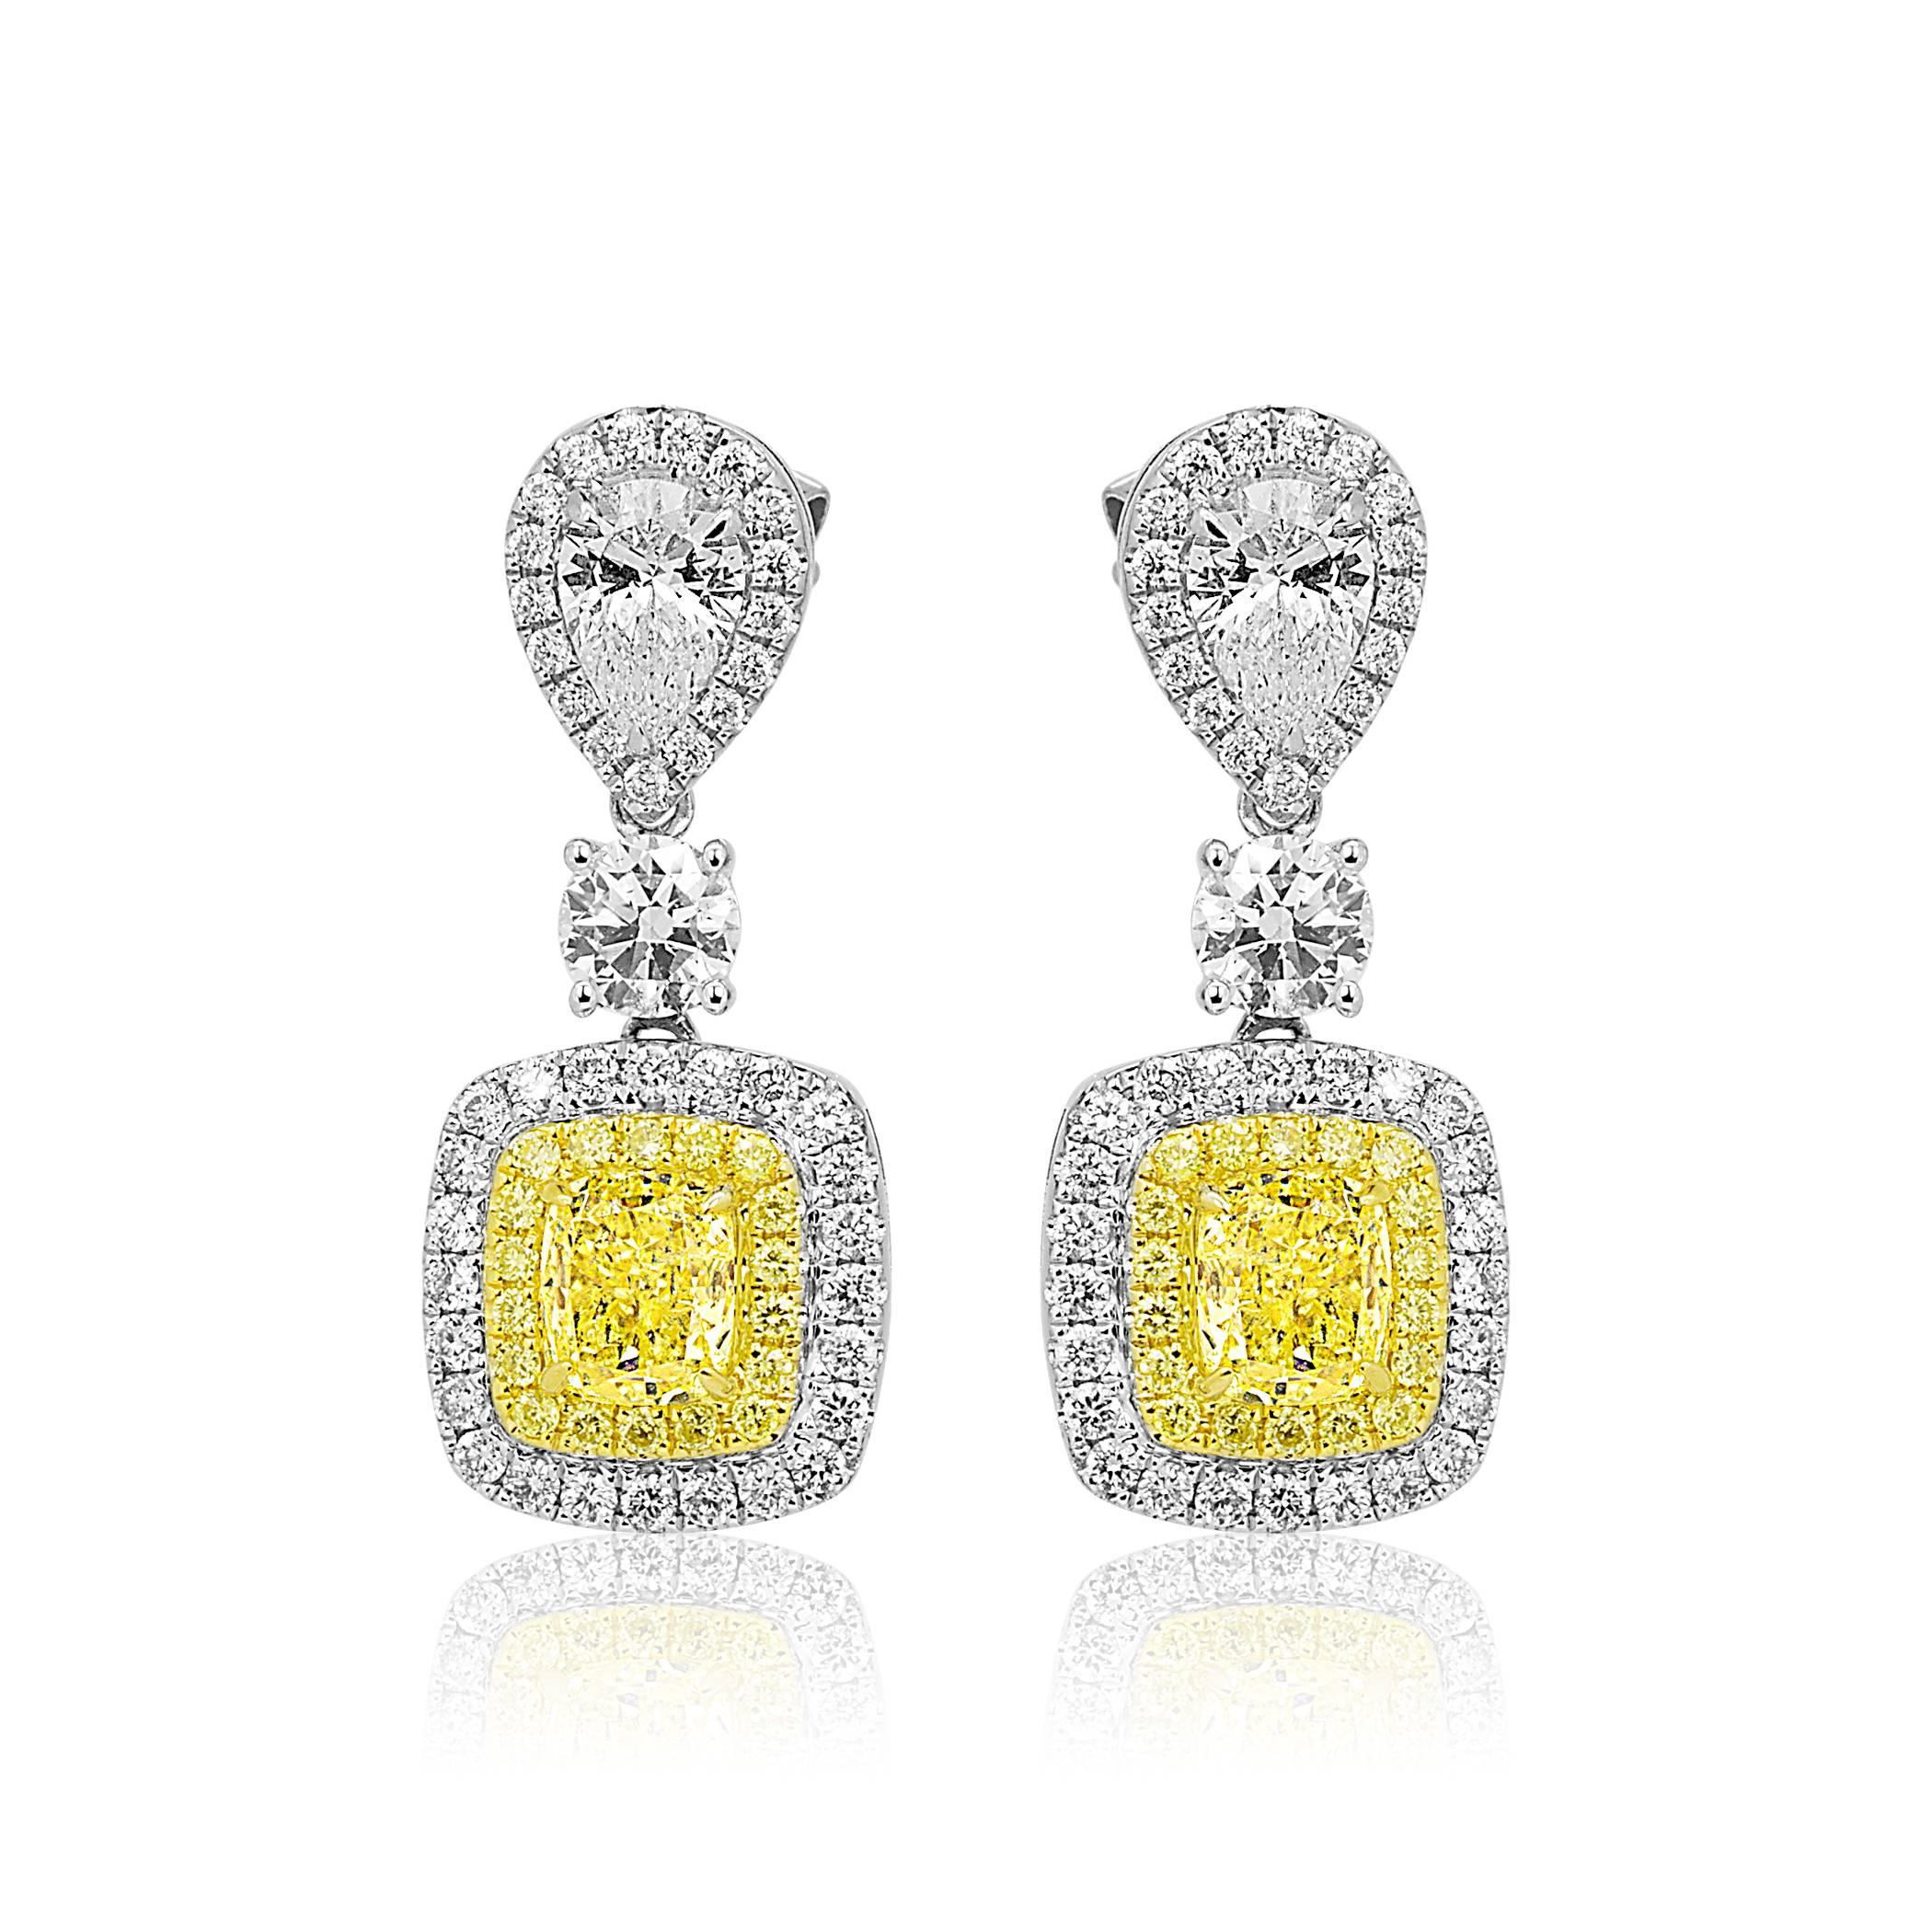 2 Natural Fancy Yellow Cushion 2.03 Carat Encircled in double Halo of Natural Fancy Yellow Rounds 0.24 Carat encircled in White Diamond Round 1.24 Carat 2 Diamond Pear shape 0.84 Carat in 18K White and Yellow Gold Dangle Drop lever back